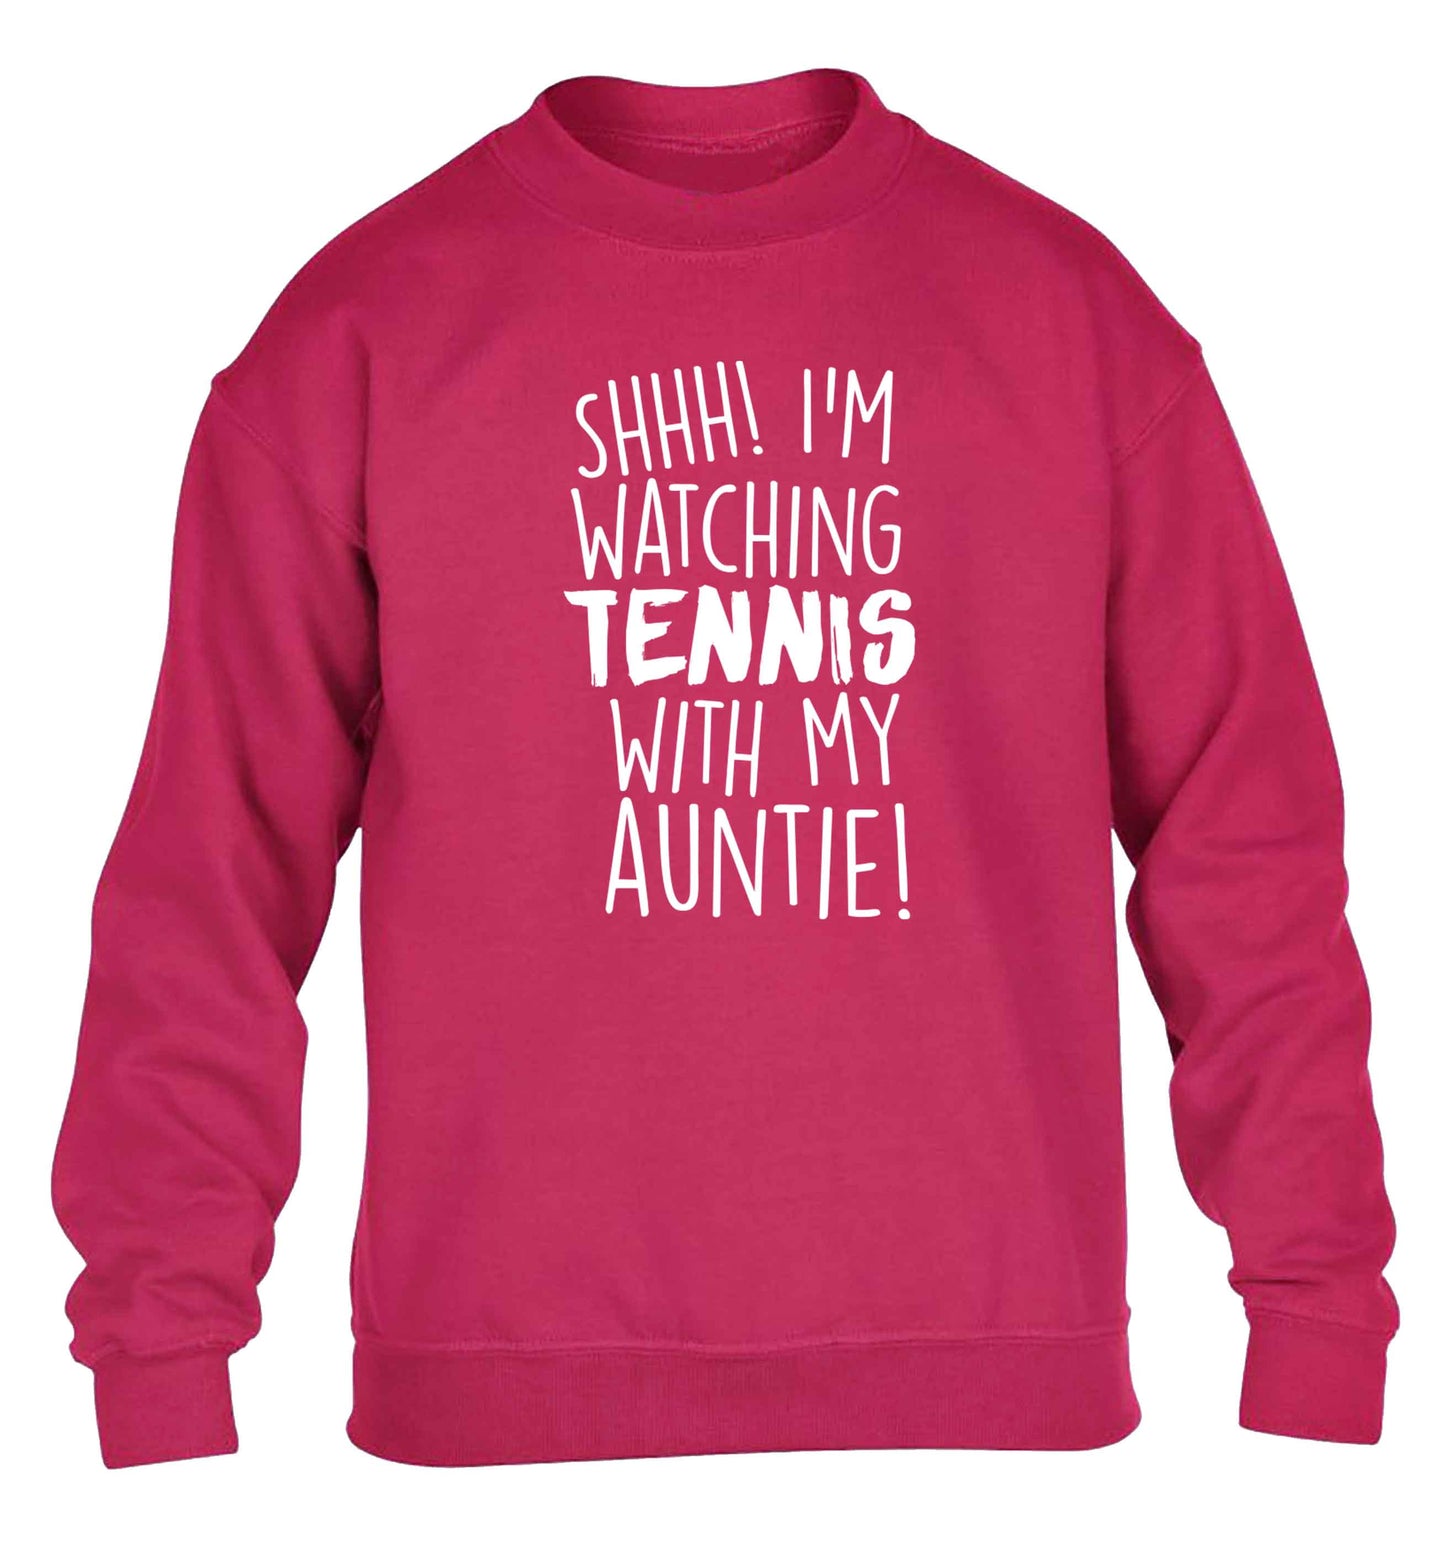 Shh! I'm watching tennis with my auntie! children's pink sweater 12-13 Years